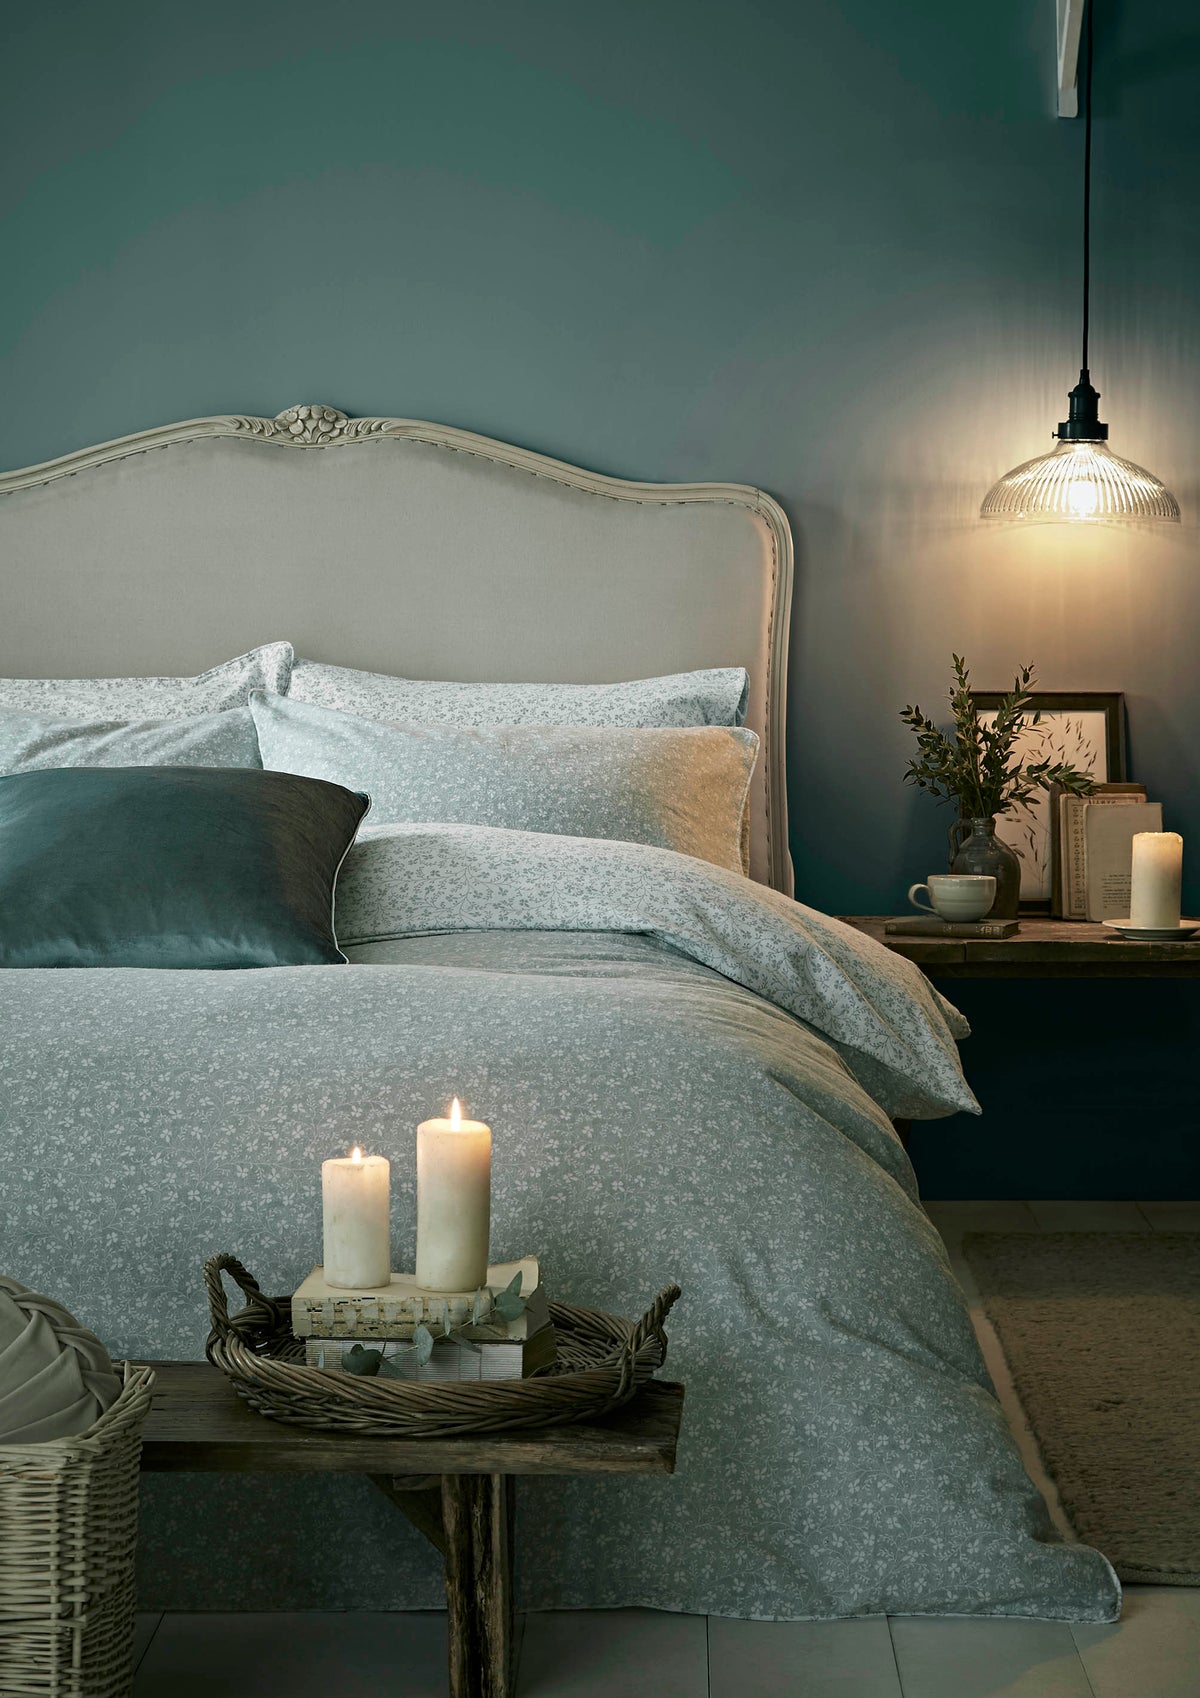 The Laura Ashley Campion Blue duvet set in brushed cotton really soft and warm all year round